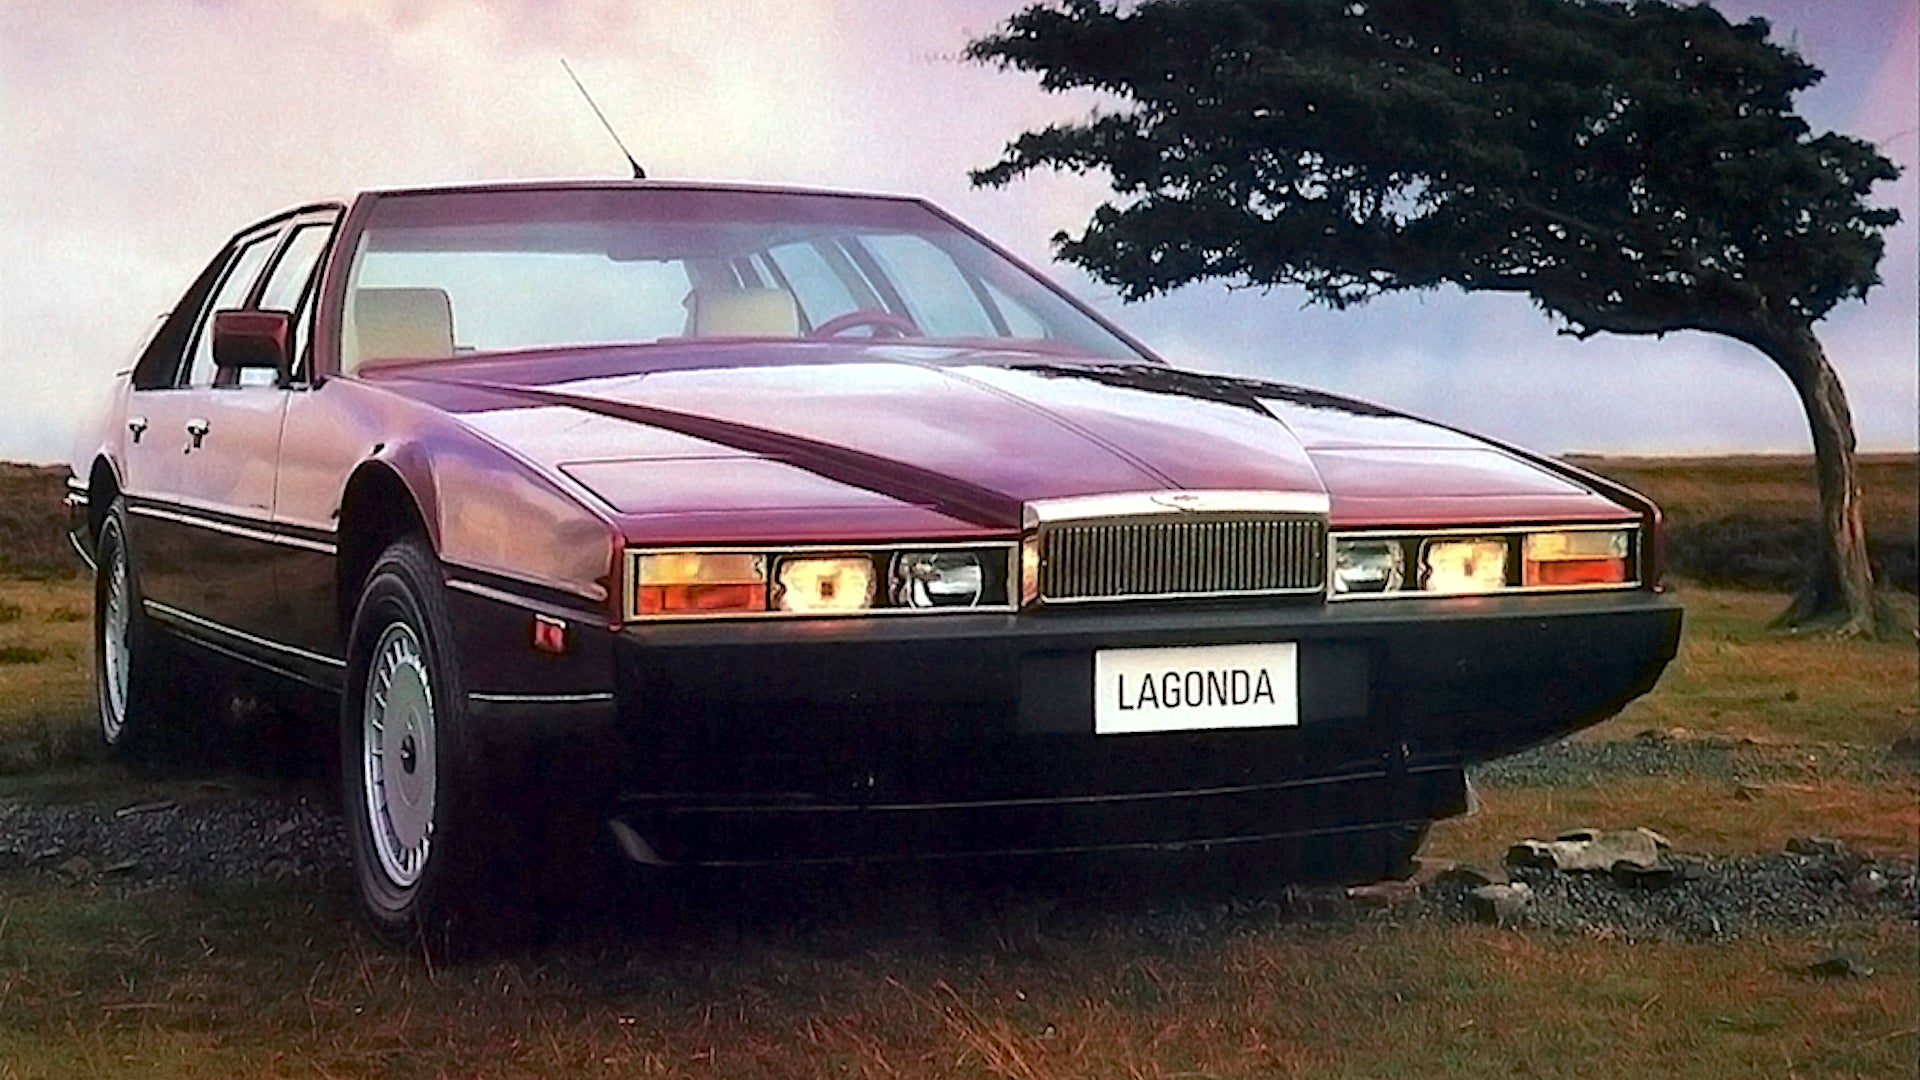 The ultra-luxurious Lagonda brand from Aston Martin has been confirmed as “completely dead.”